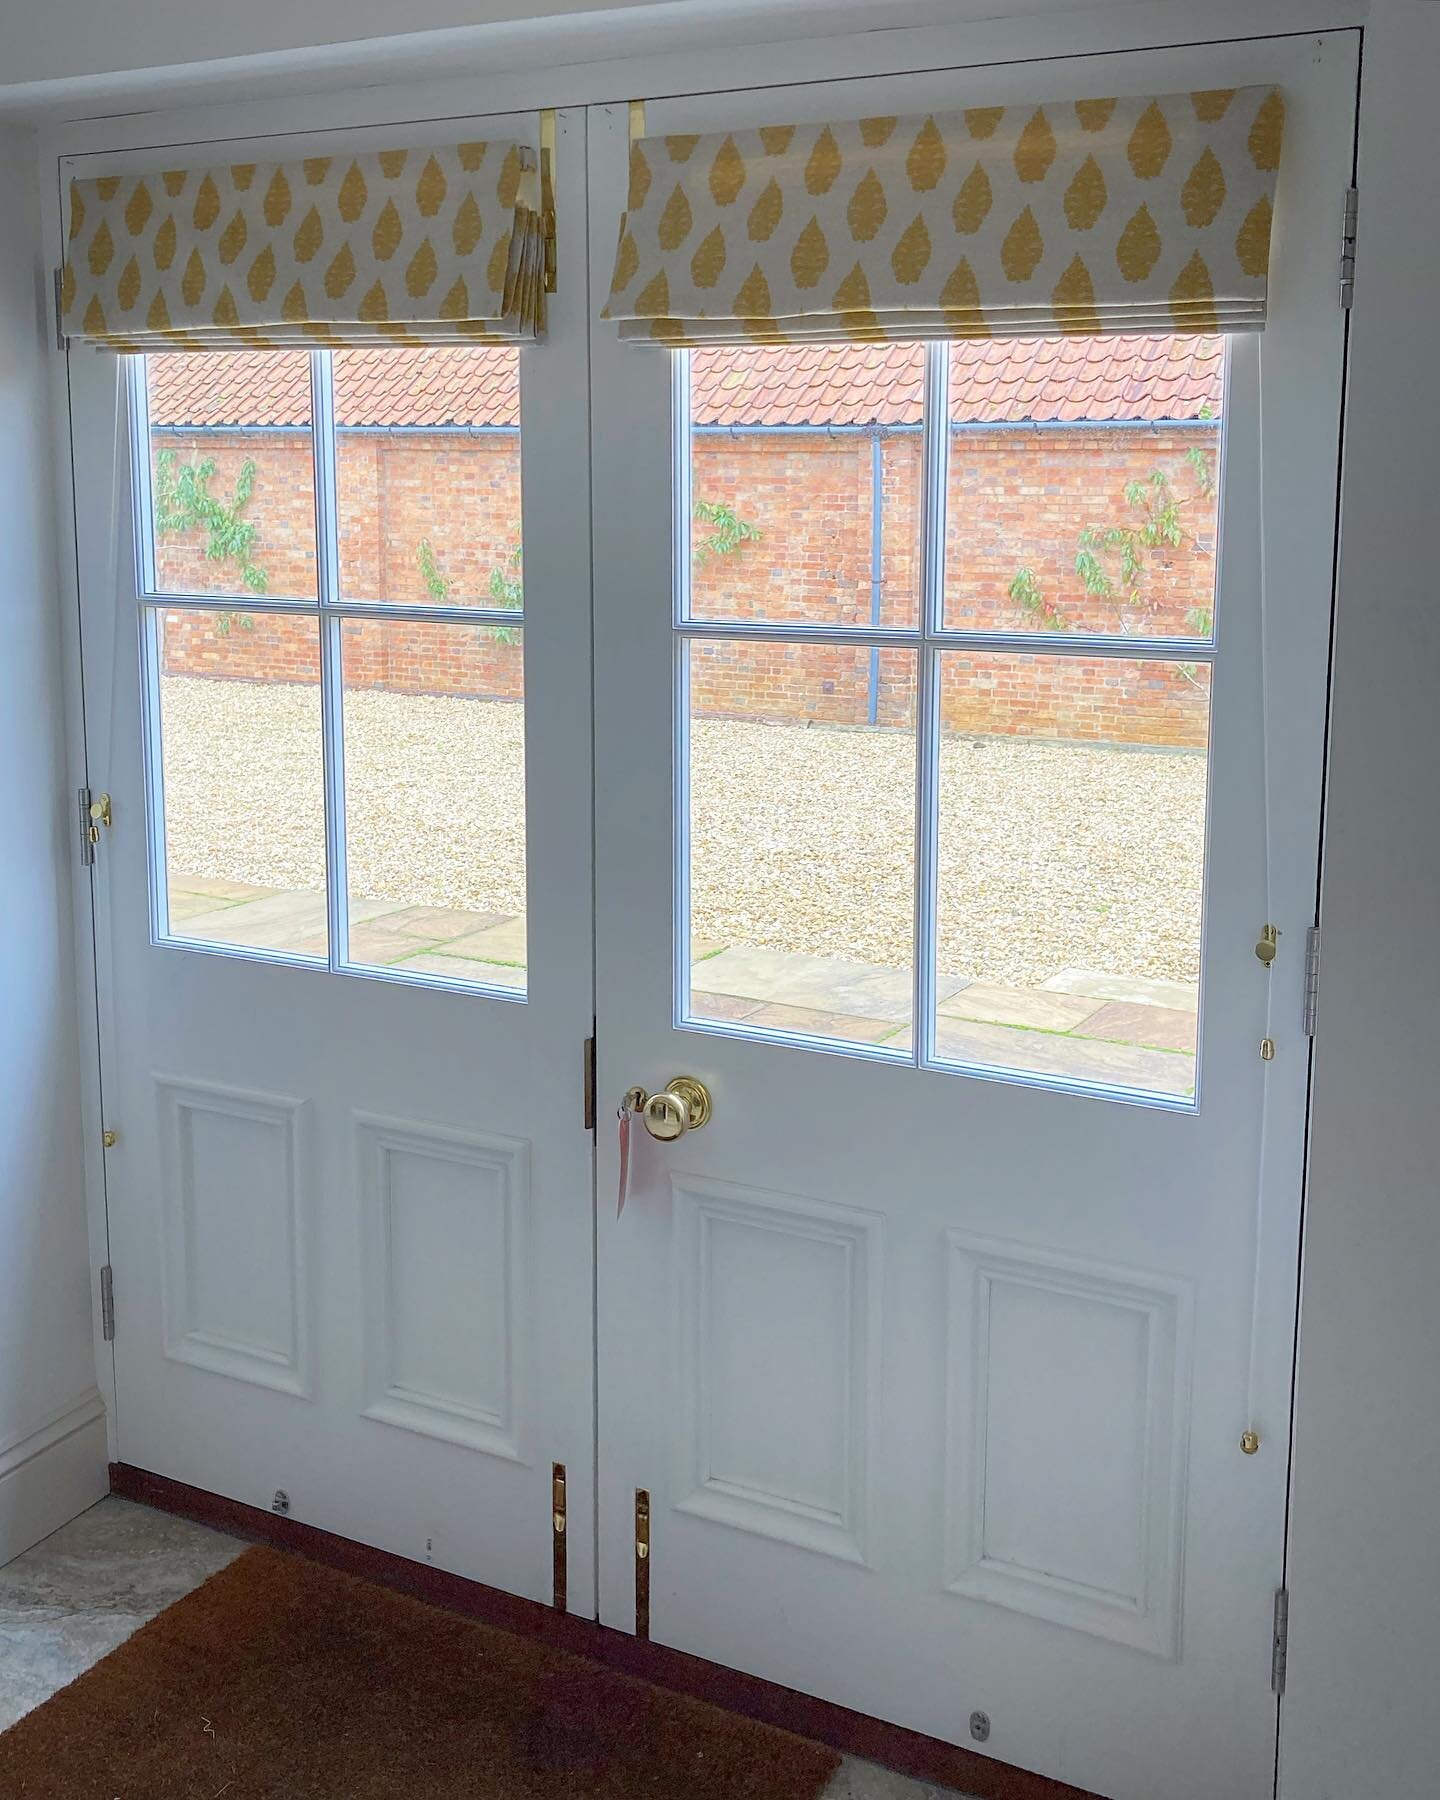 These sweet Roman blinds using the beautiful design by @juliabrendelltd fabric, finish off these double doors so well and provide privacy in these dark mornings and evenings! In fact, I think the fabric brightens up any dreary January day! 💛💛💛 #hv